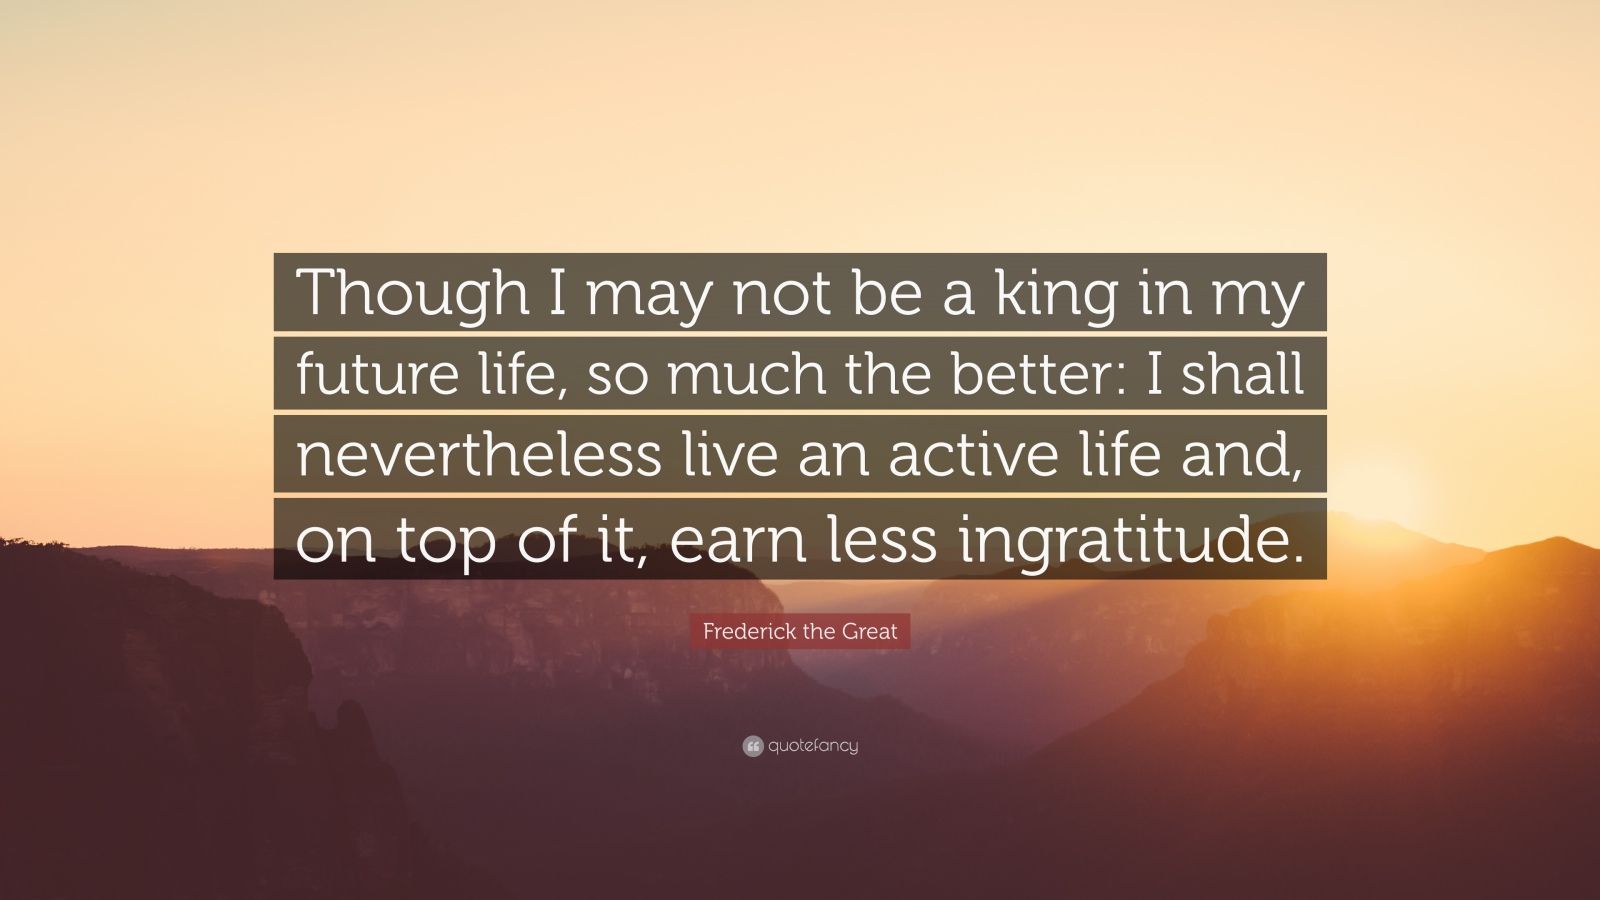 Frederick the Great Quote: “Though I may not be a king in my future